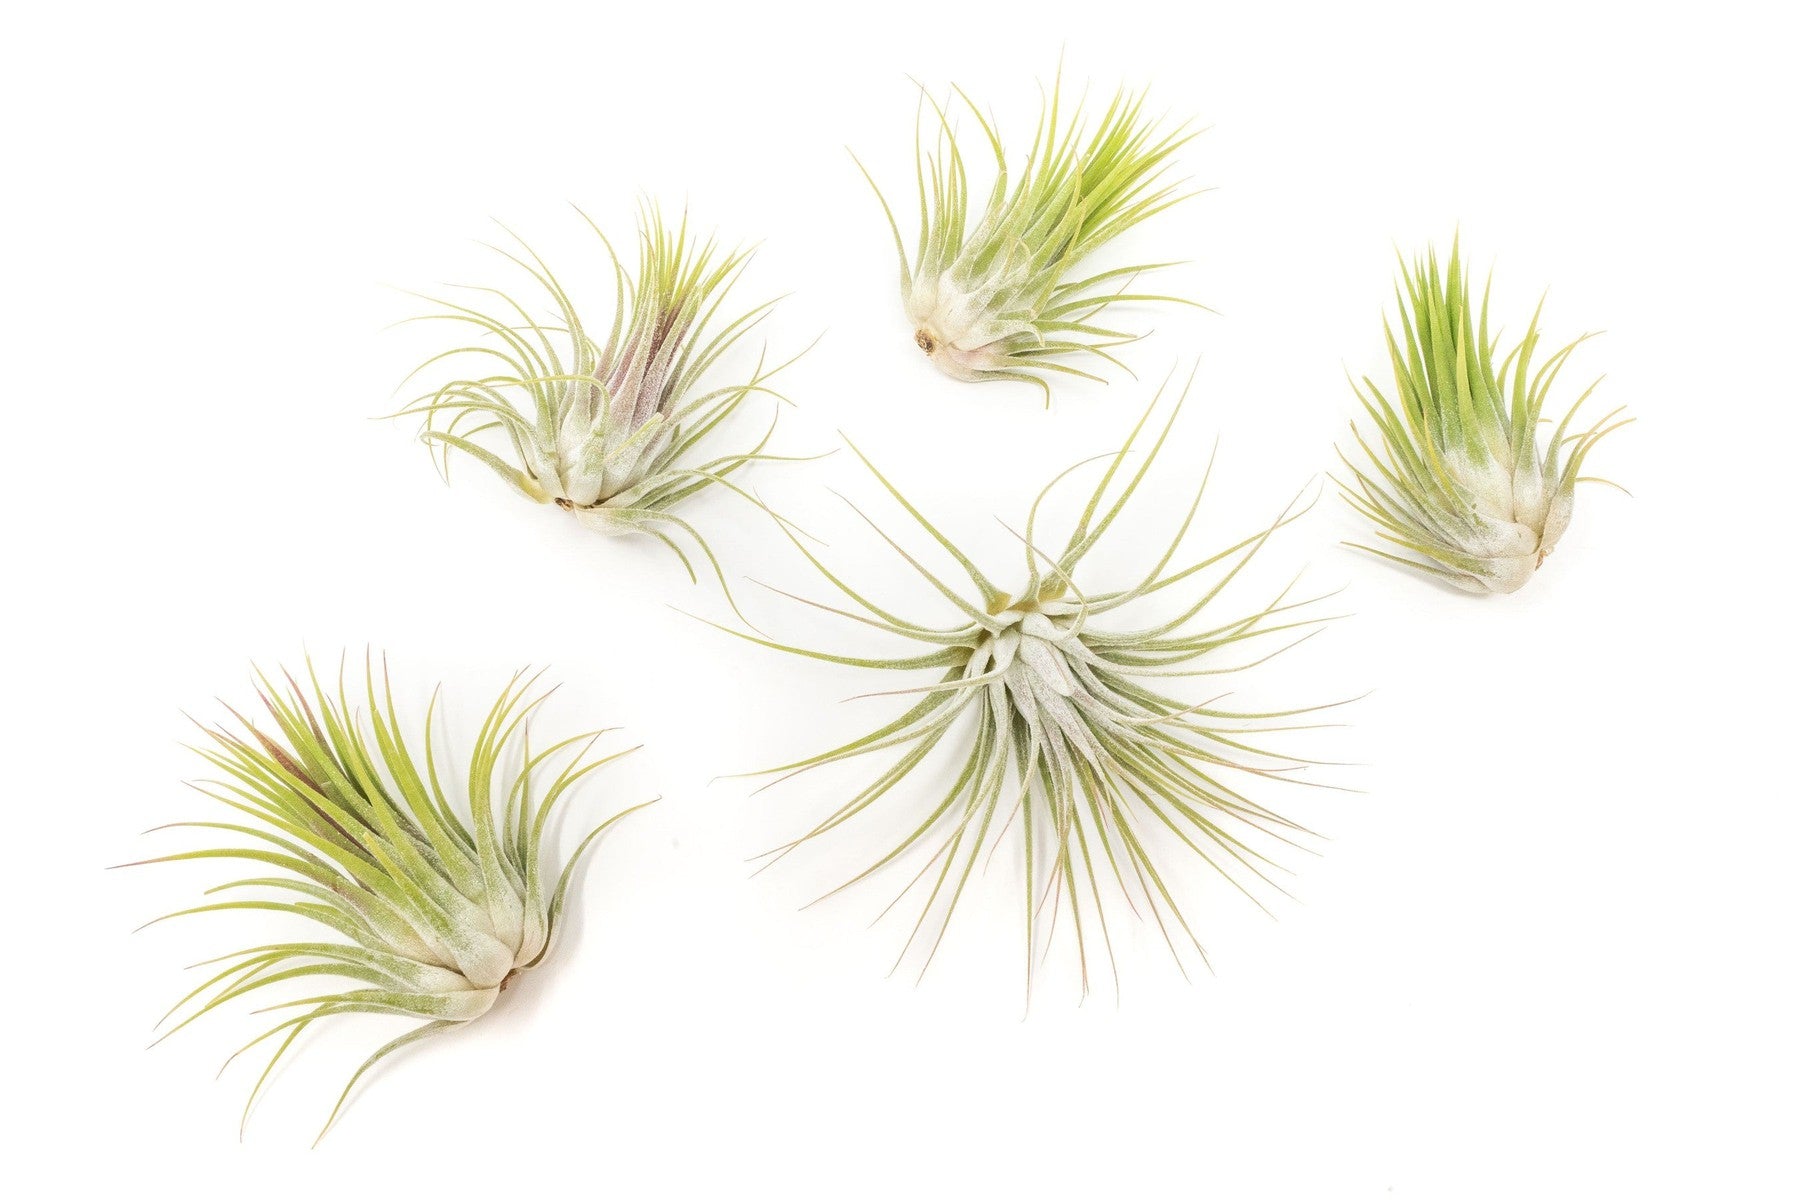 SALE - Tillandsia Ionantha Guatemala Air Plants - Set of 10, 20 or 50 Air Plants - 70% Off-airplant-The Succulent Source